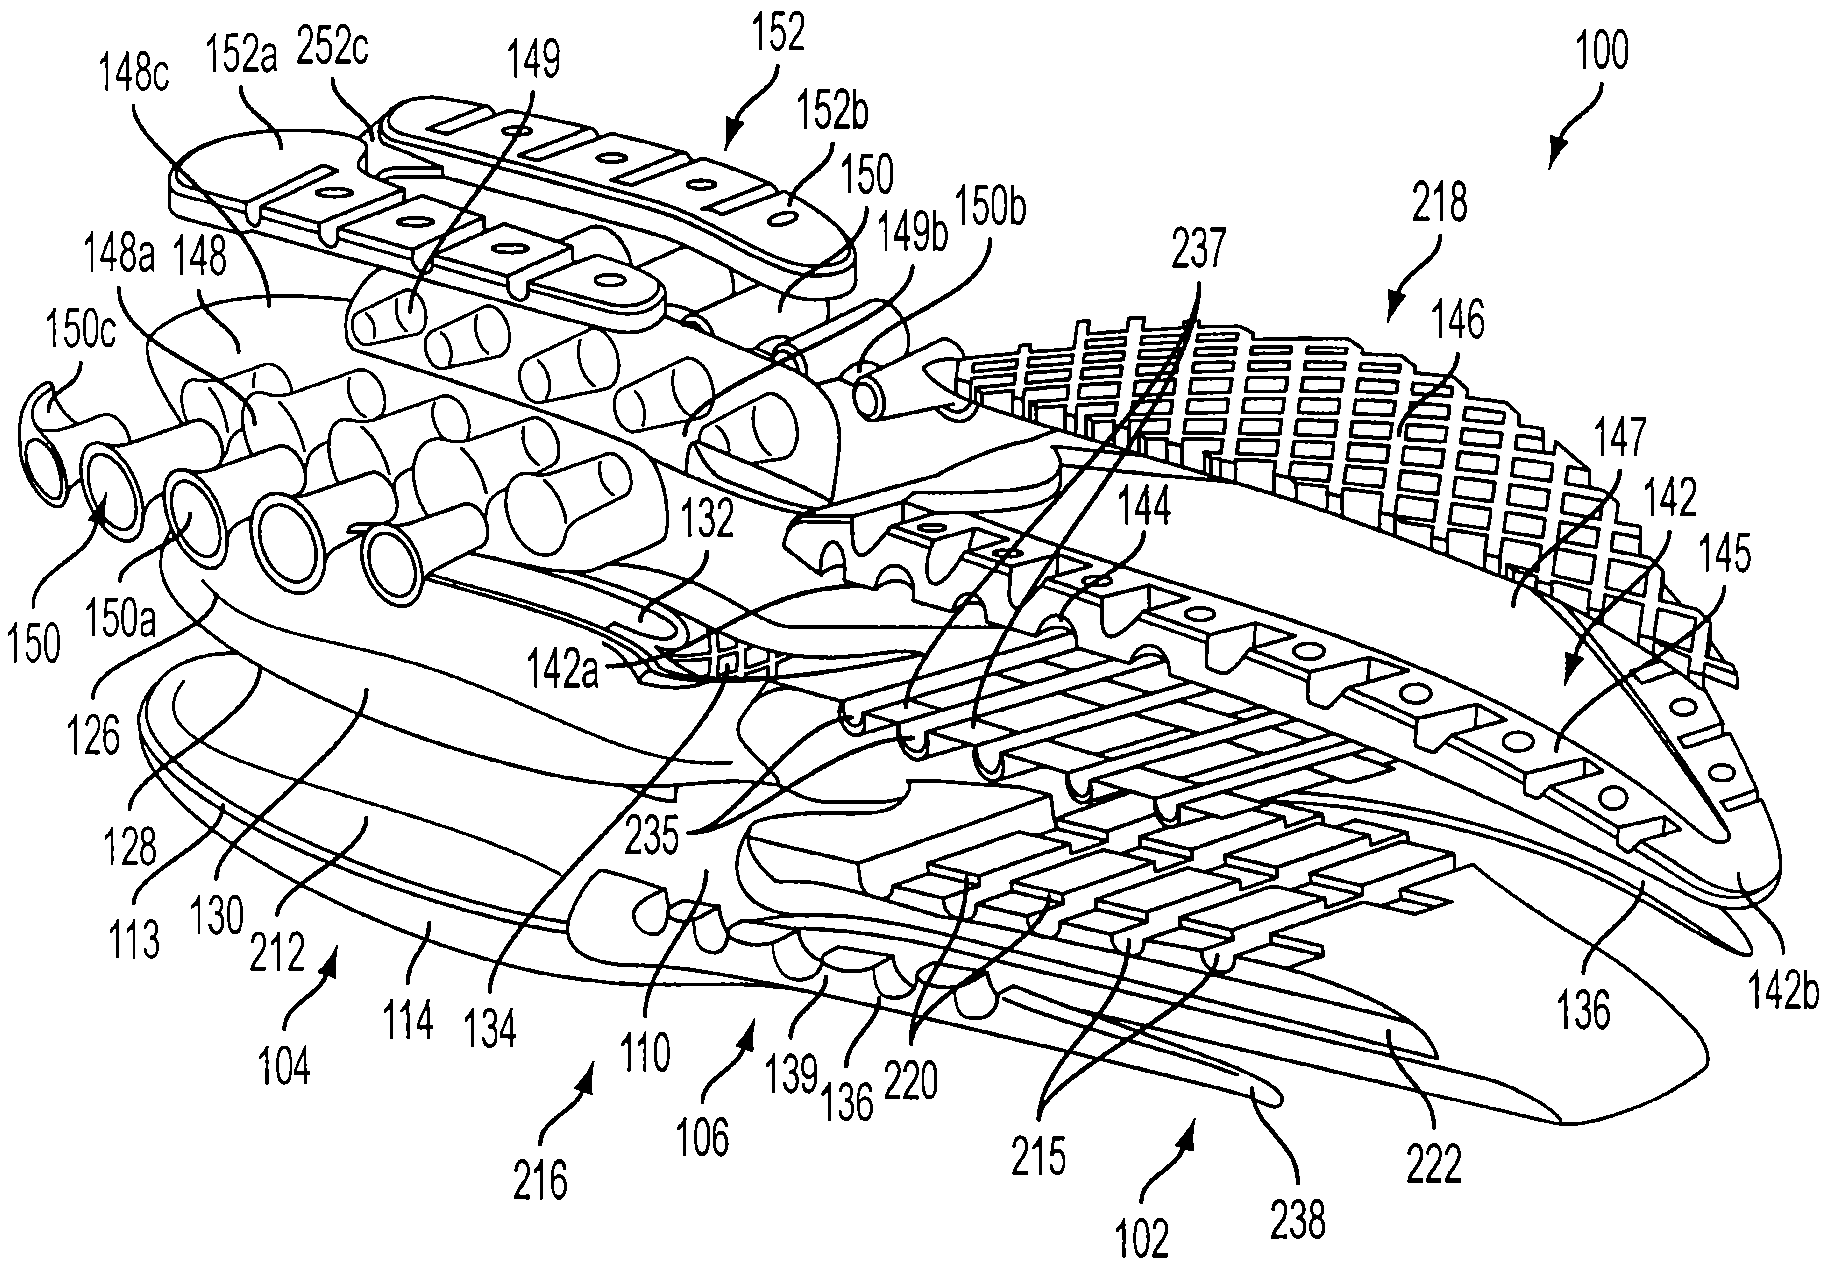 Article of footwear having a cushioning sole